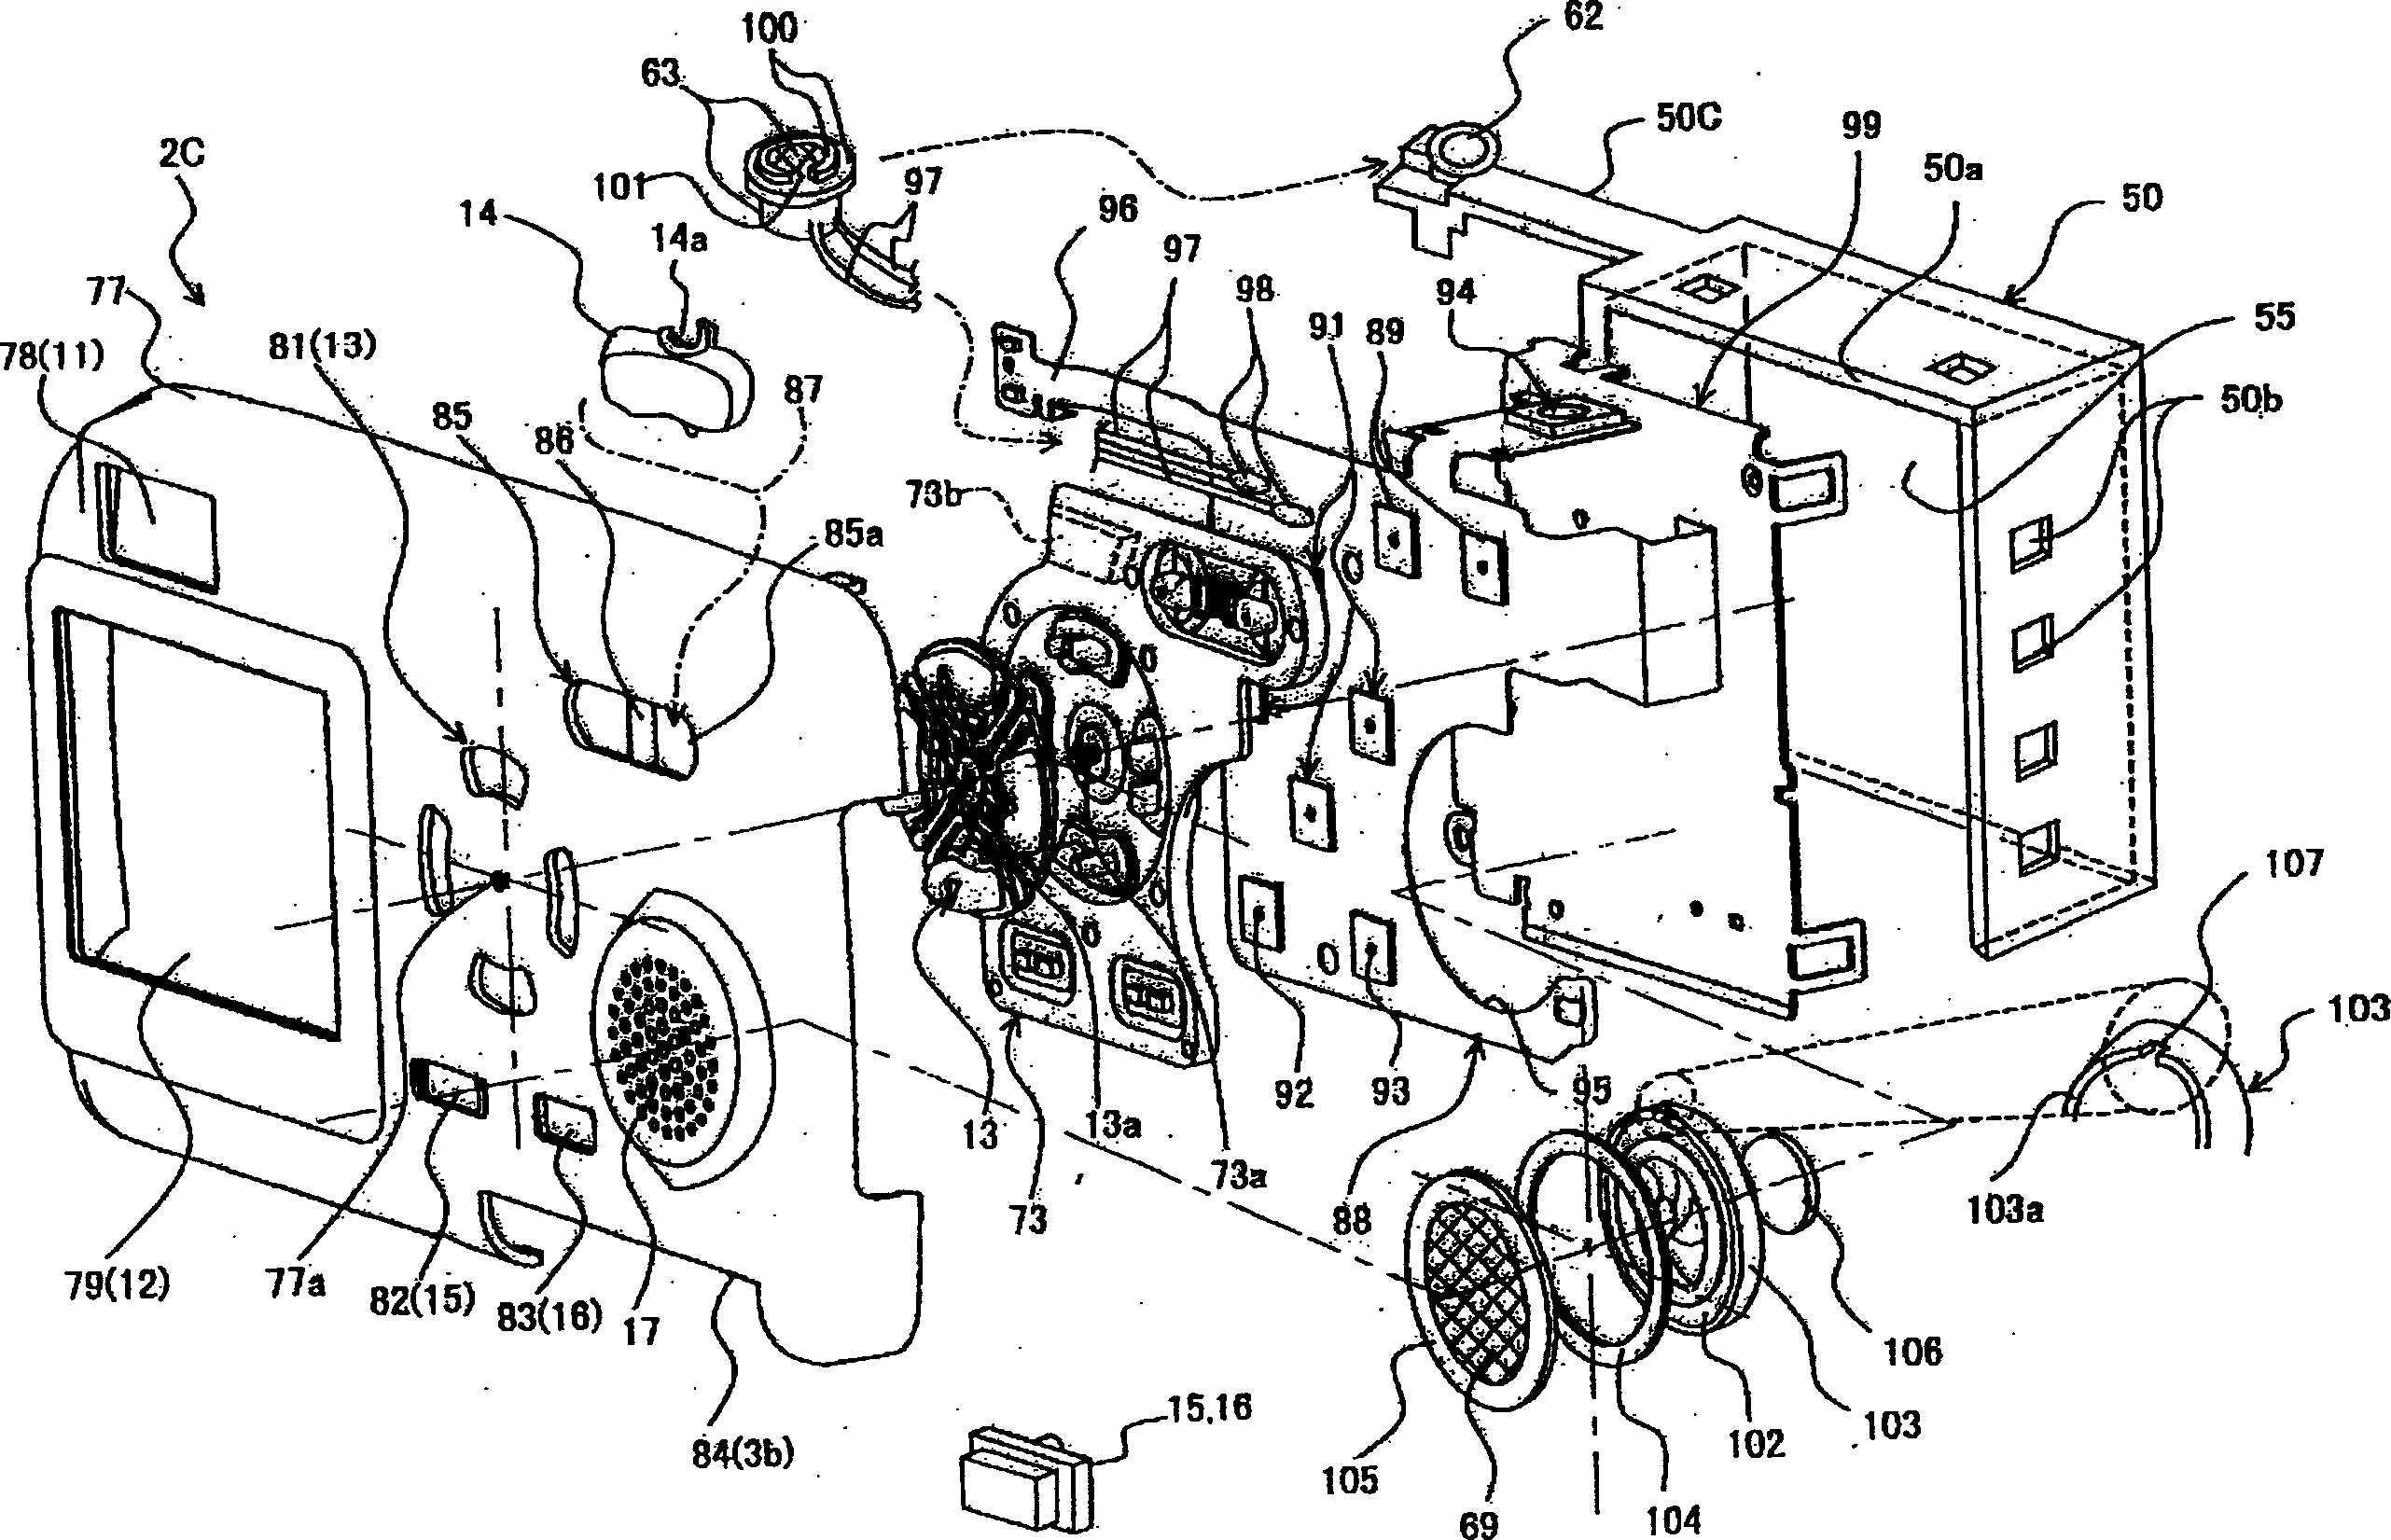 Camera and electronic apparatus